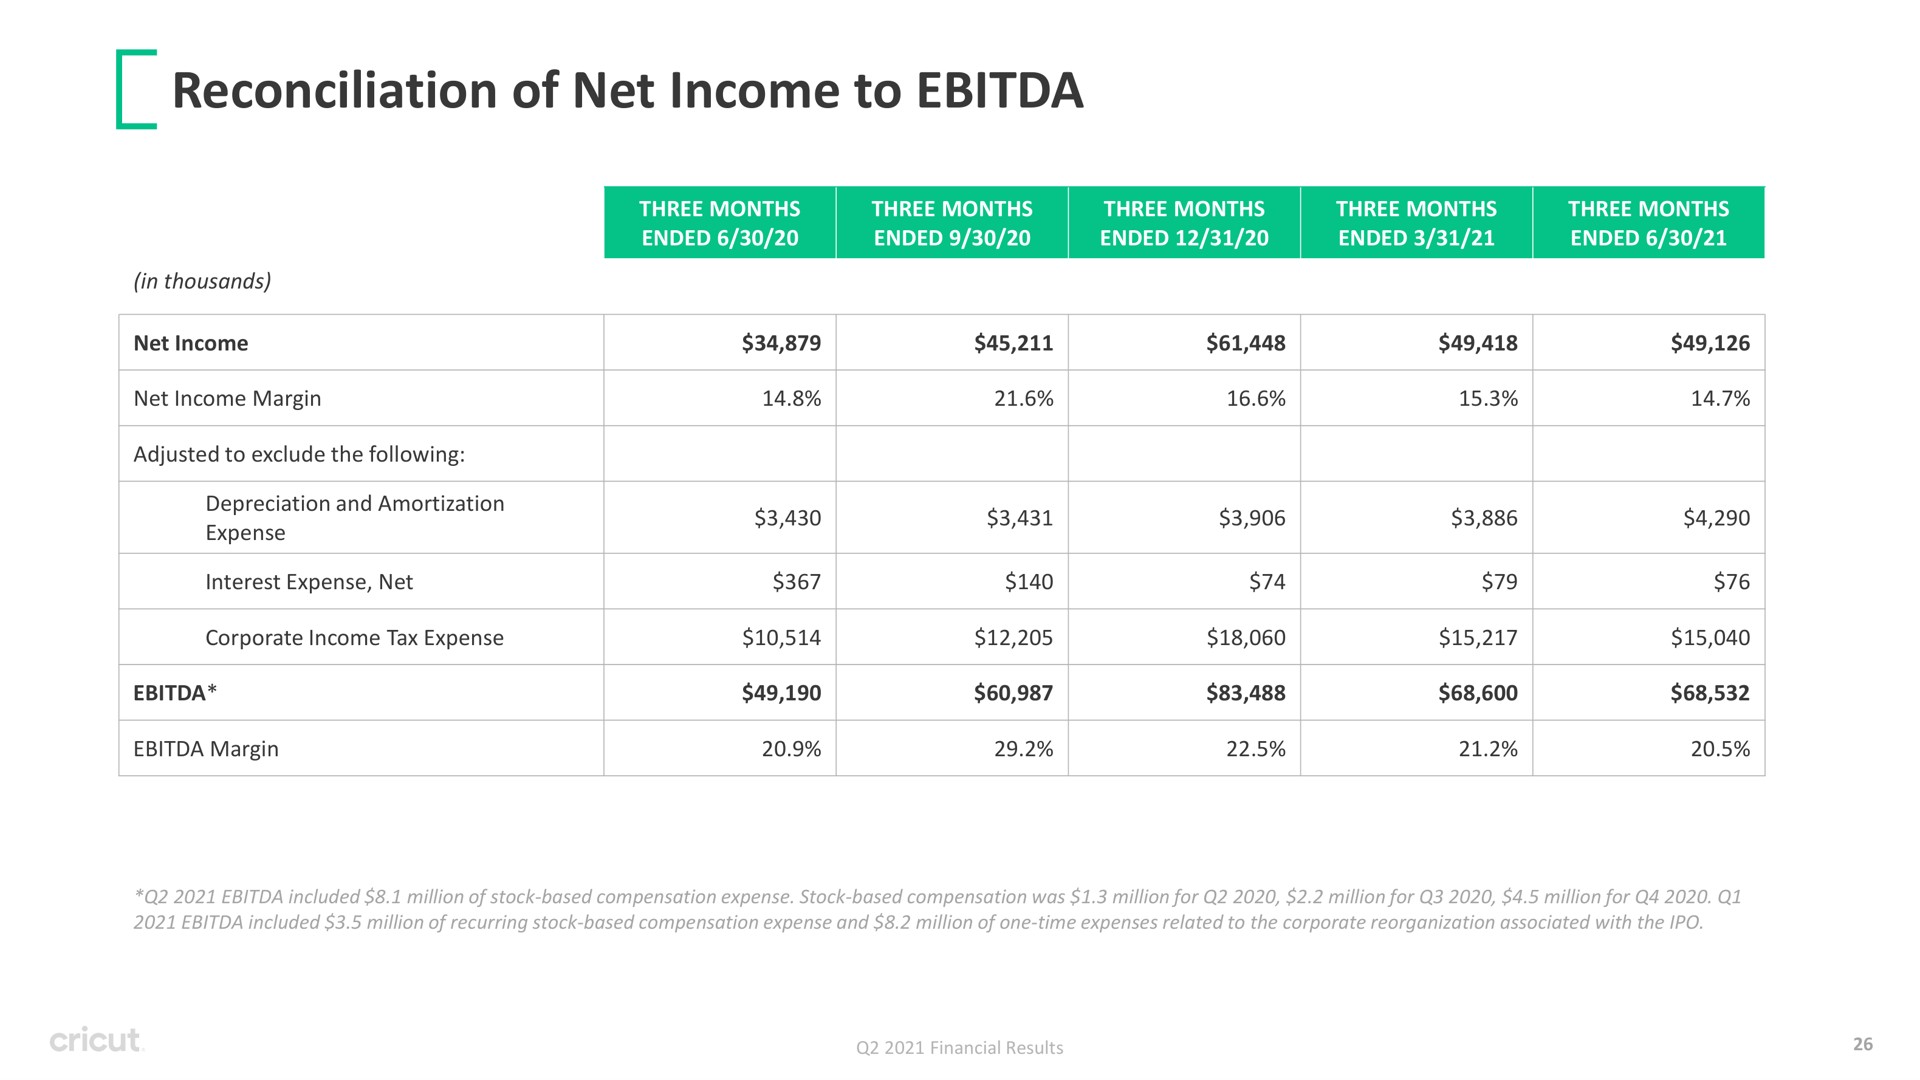 reconciliation of net income to i | Circut